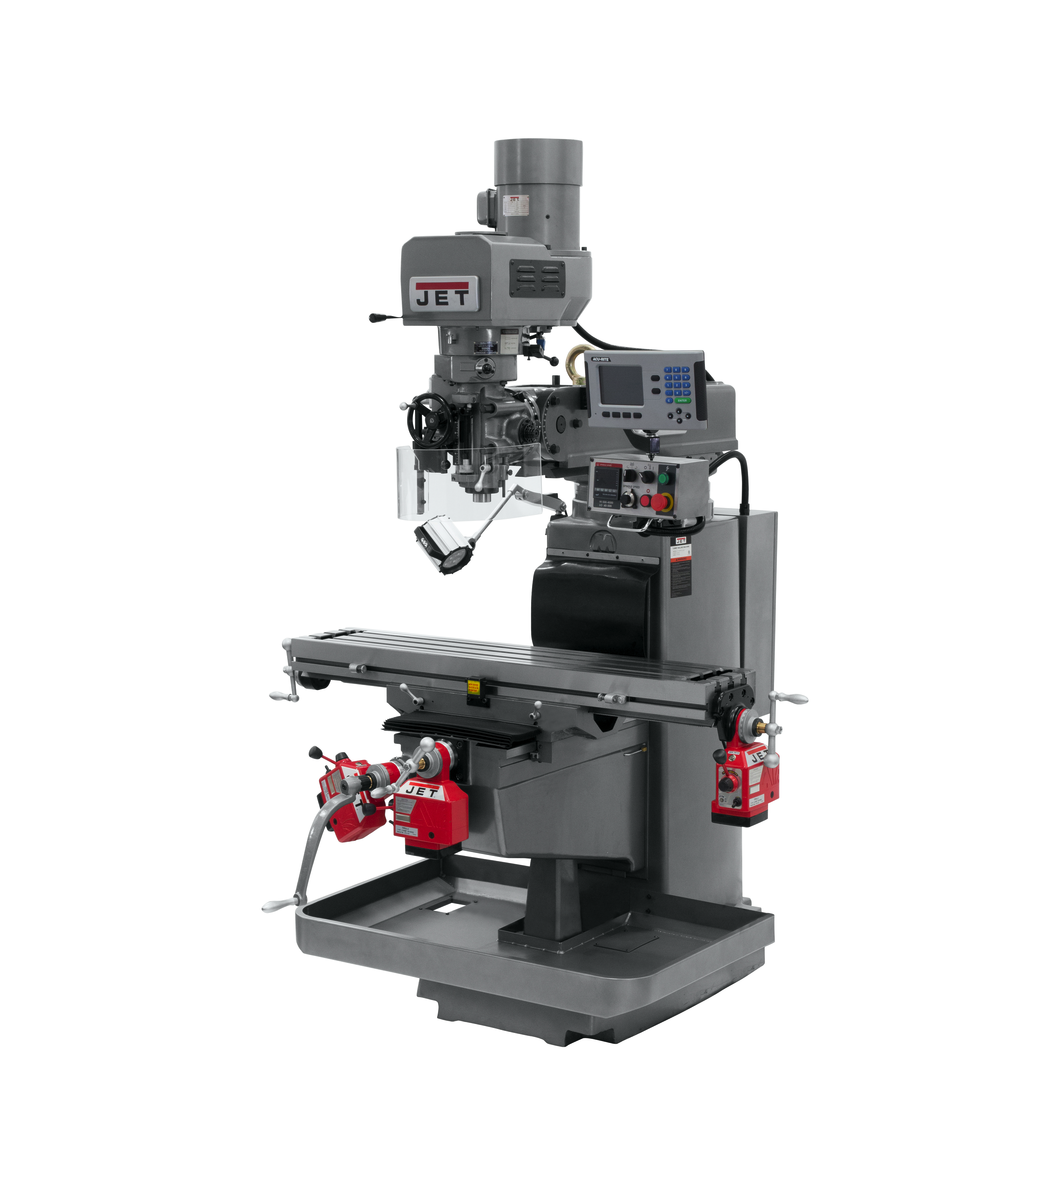 JTM-1050EVS2/230 Mill With Acu-Rite 203 DRO With X, Y and Z-Axis Powerfeeds